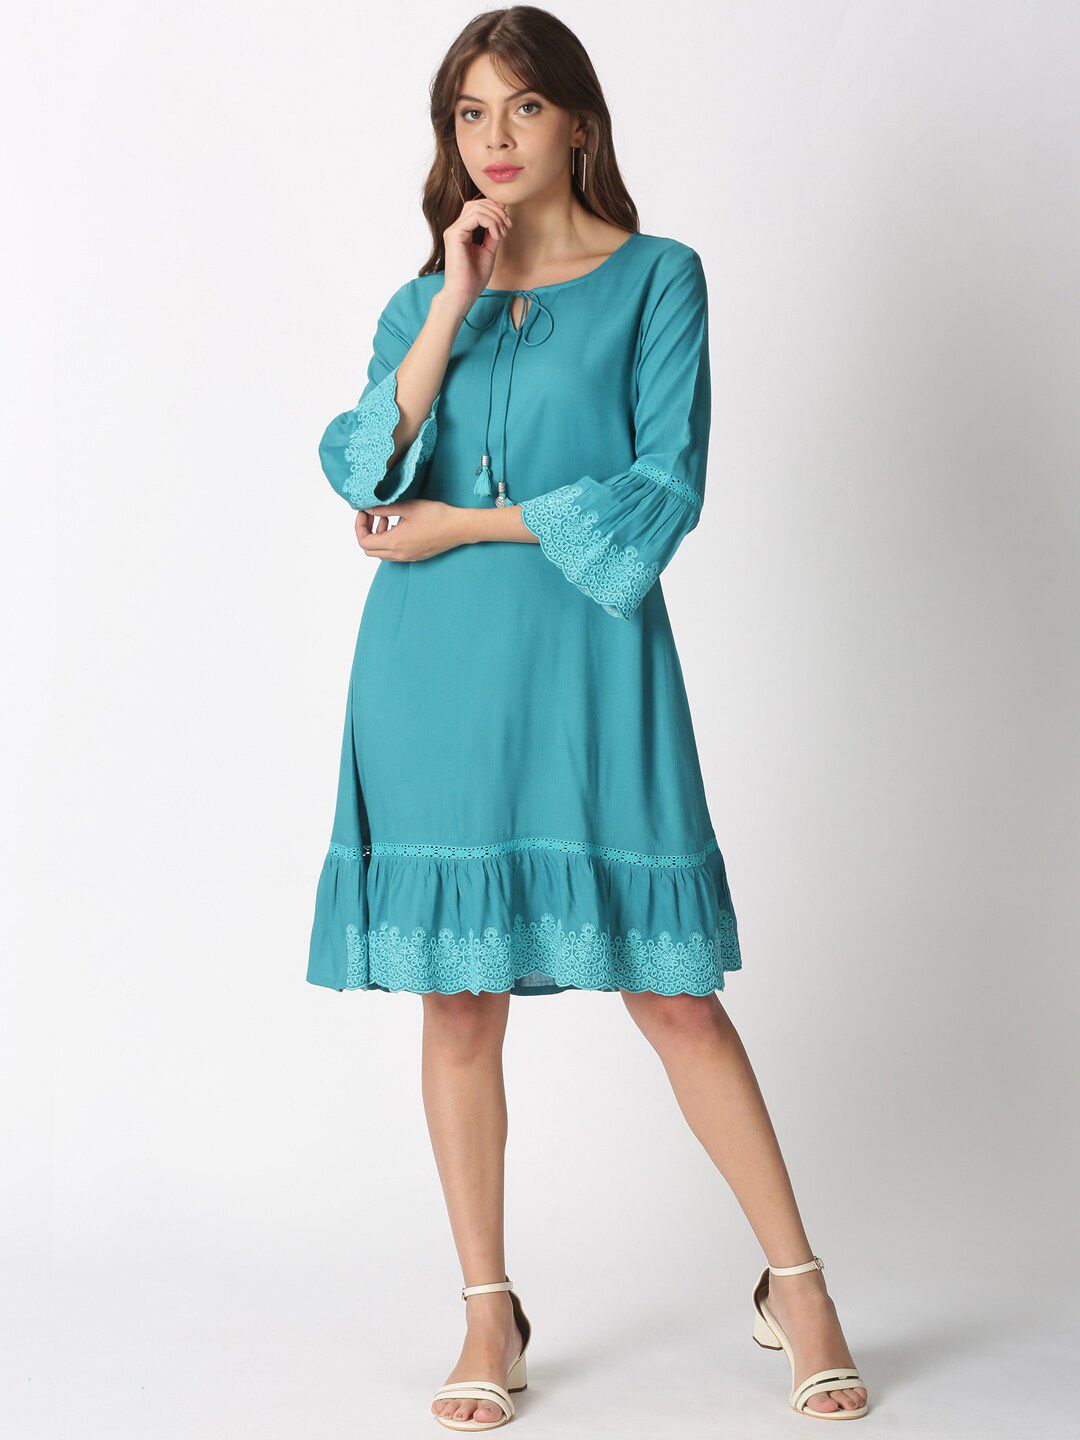 Saffron Threads Turquoise Blue A-line Dress with Lace Embroidered Details Price in India